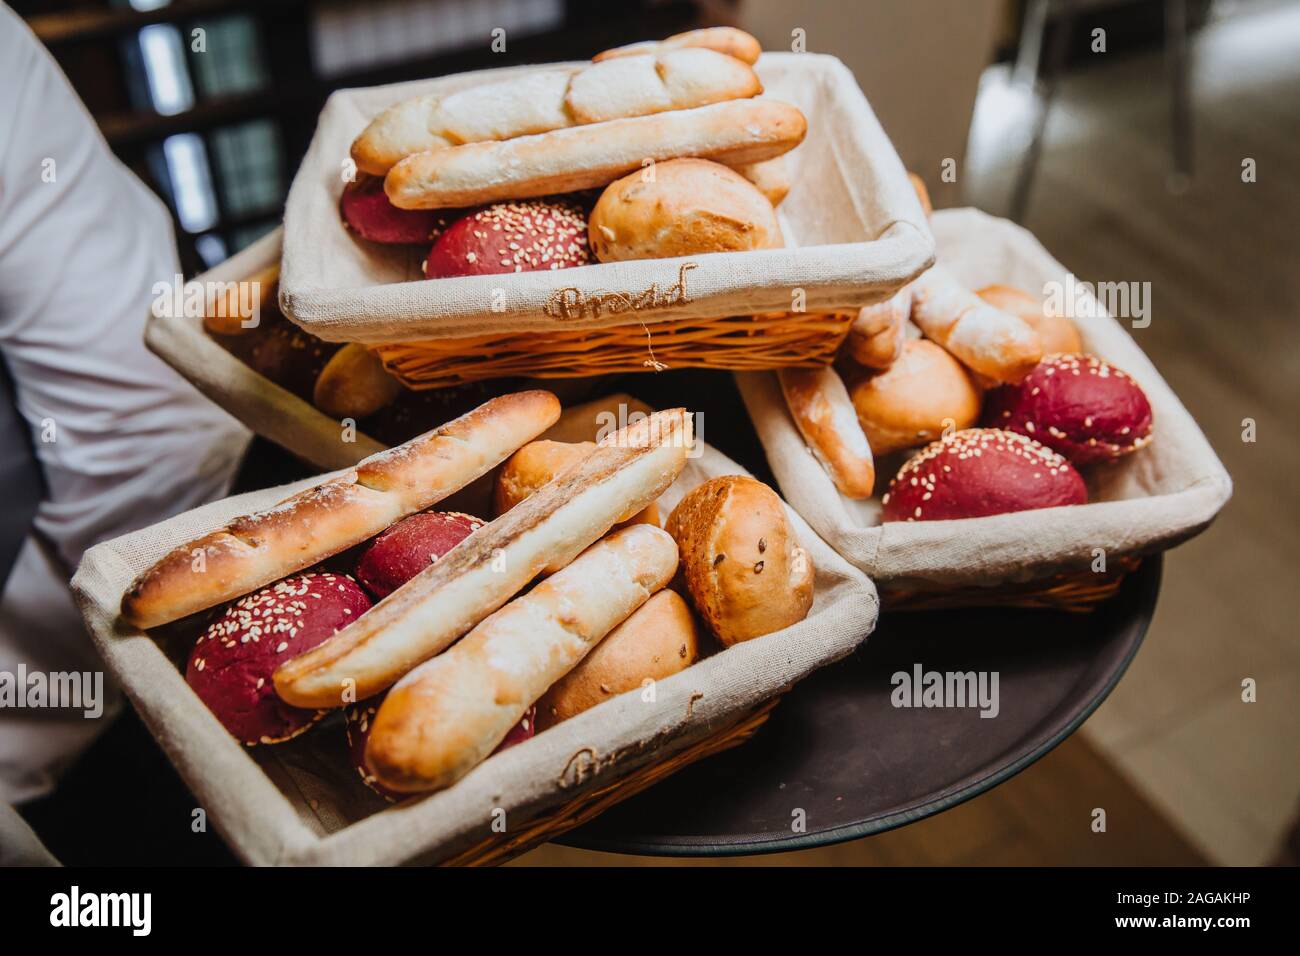 Delicious air bread with a crisp crust lies in a wicker basket, ready to serve. Stock Photo